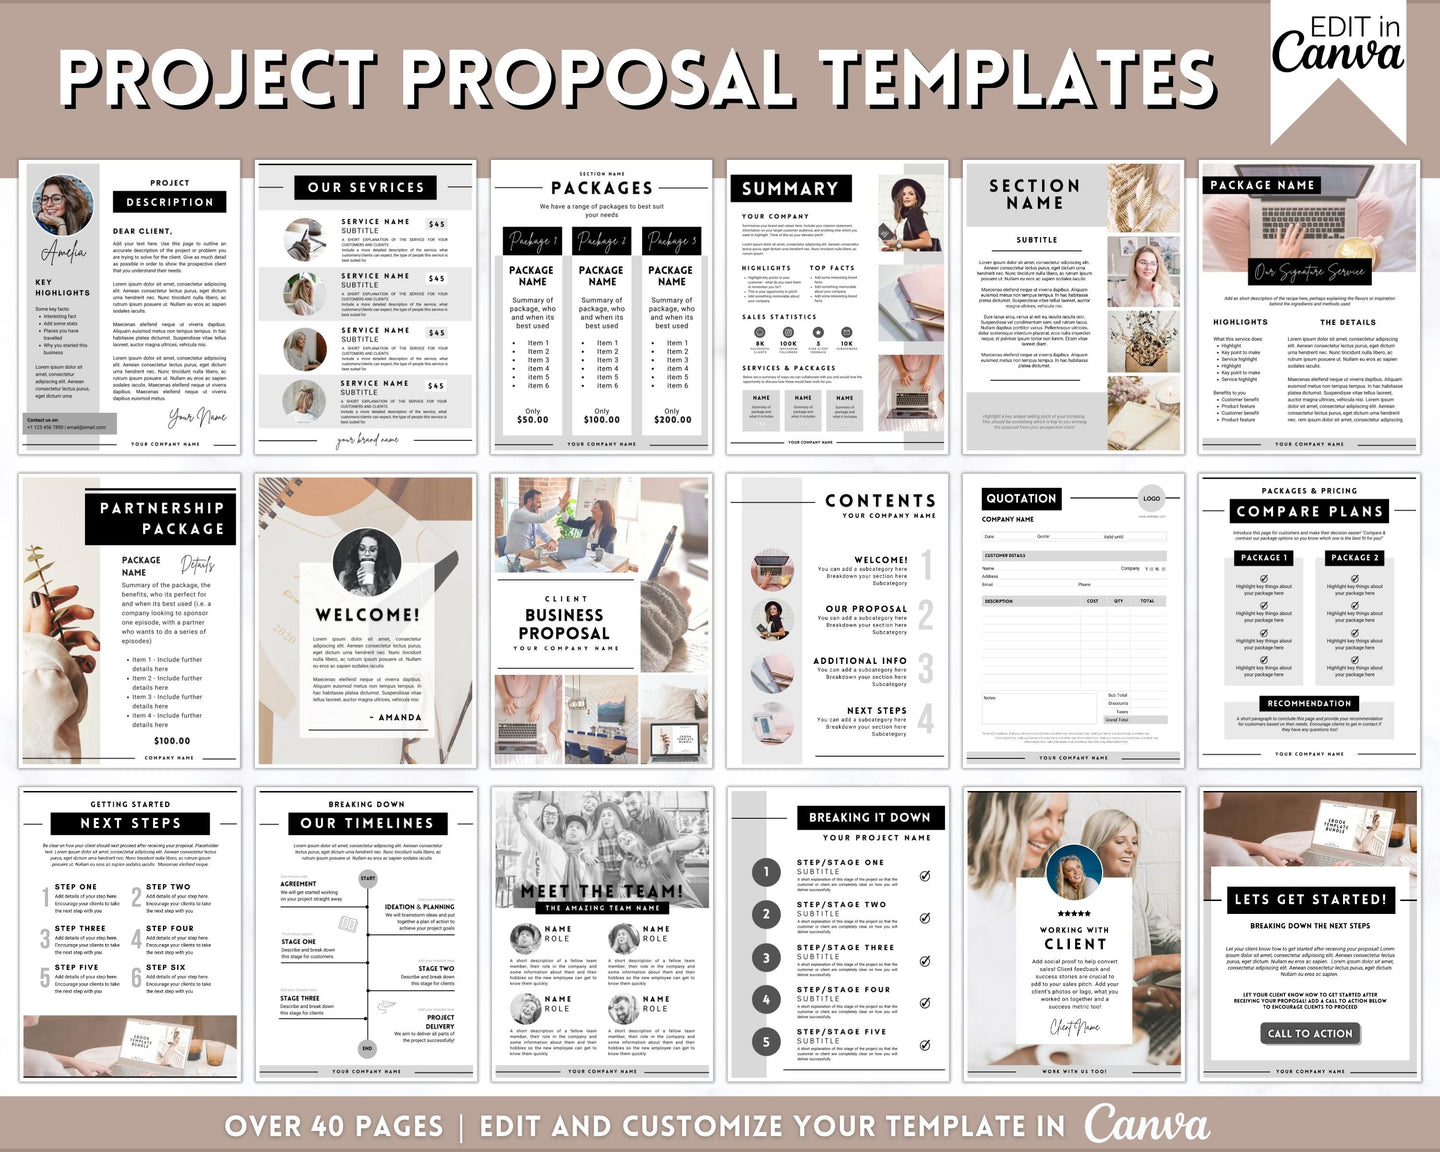 Business Project Proposal Template | 40 Editable Canva Templates for Pitch Decks, Quotes, Marketing Price Lists, Small Business Services